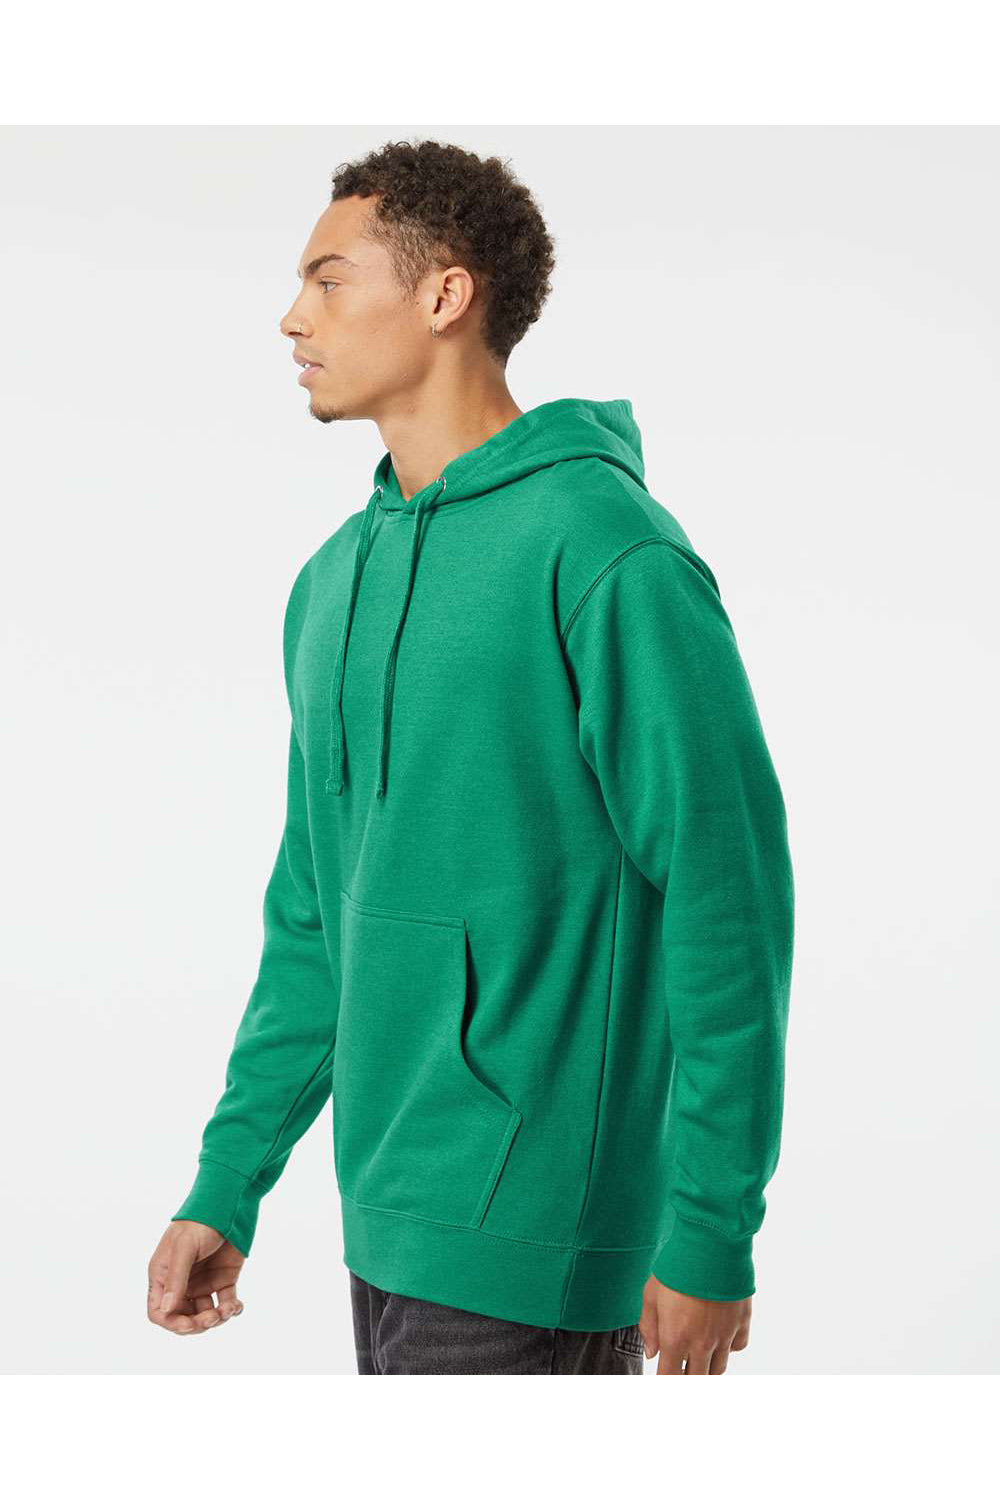 Independent Trading Co. SS4500 Mens Hooded Sweatshirt Hoodie Heather Kelly Green Model Side